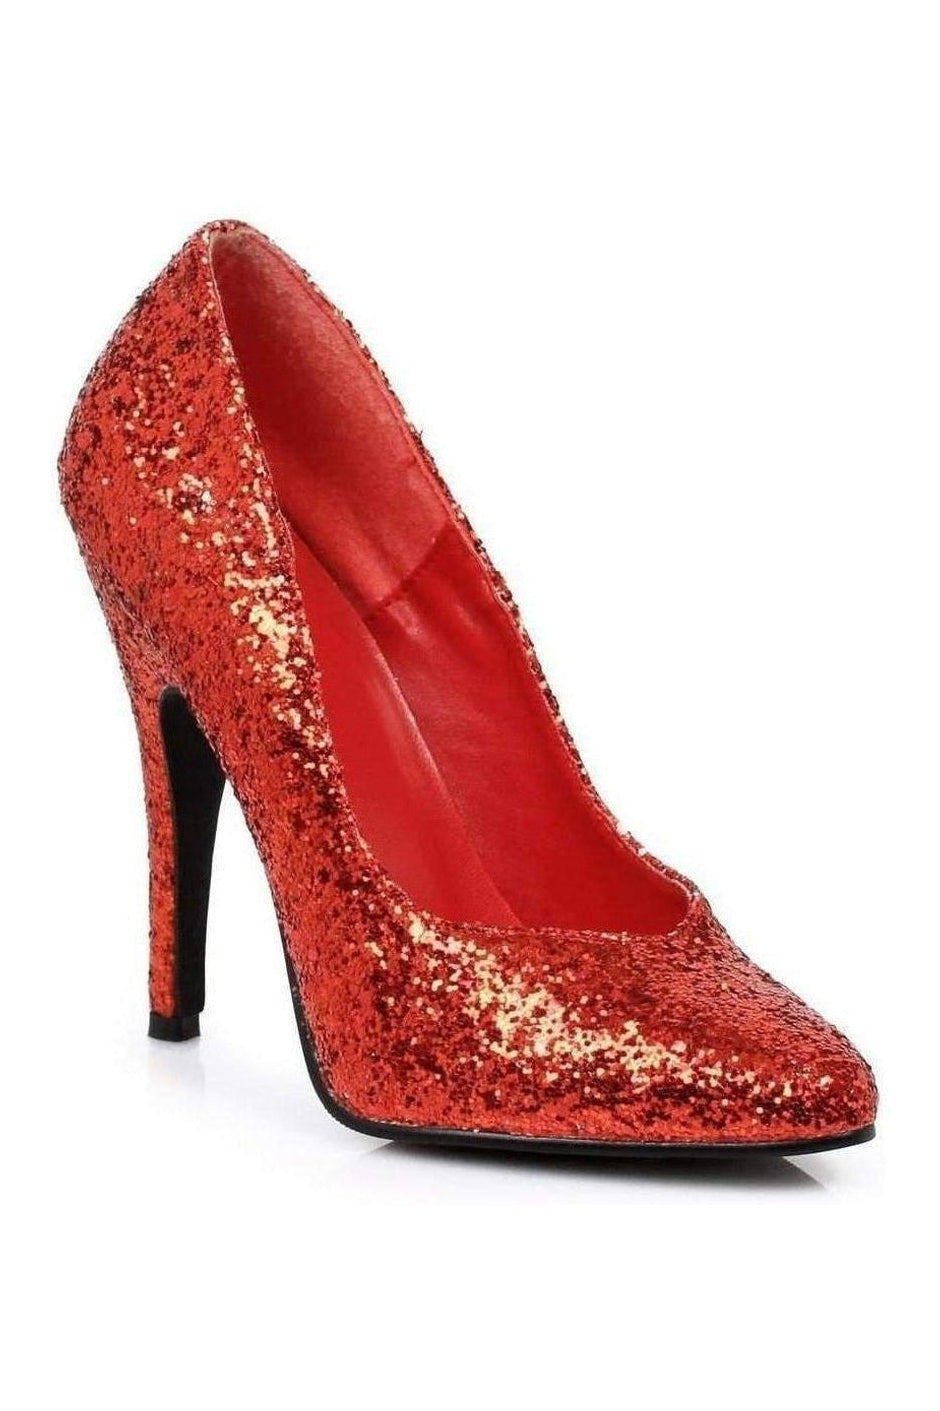 511-GLITTER Pump | Red Glitter-Ellie Shoes-Red-Pumps-SEXYSHOES.COM